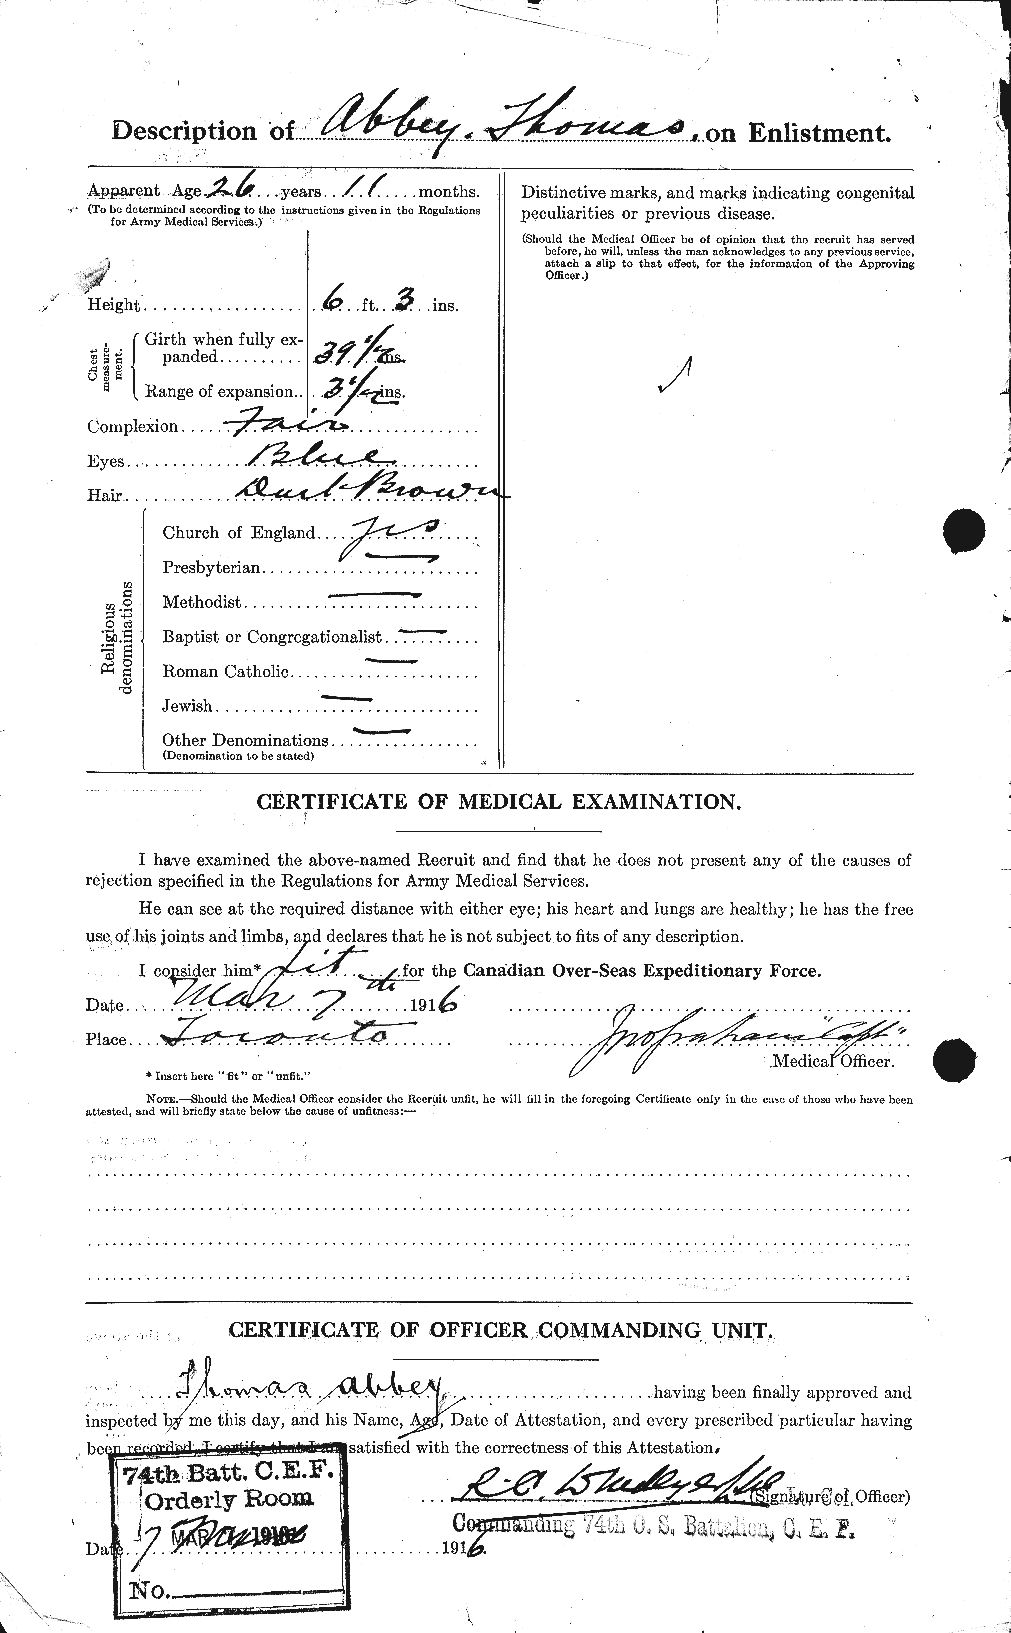 Personnel Records of the First World War - CEF 200780b